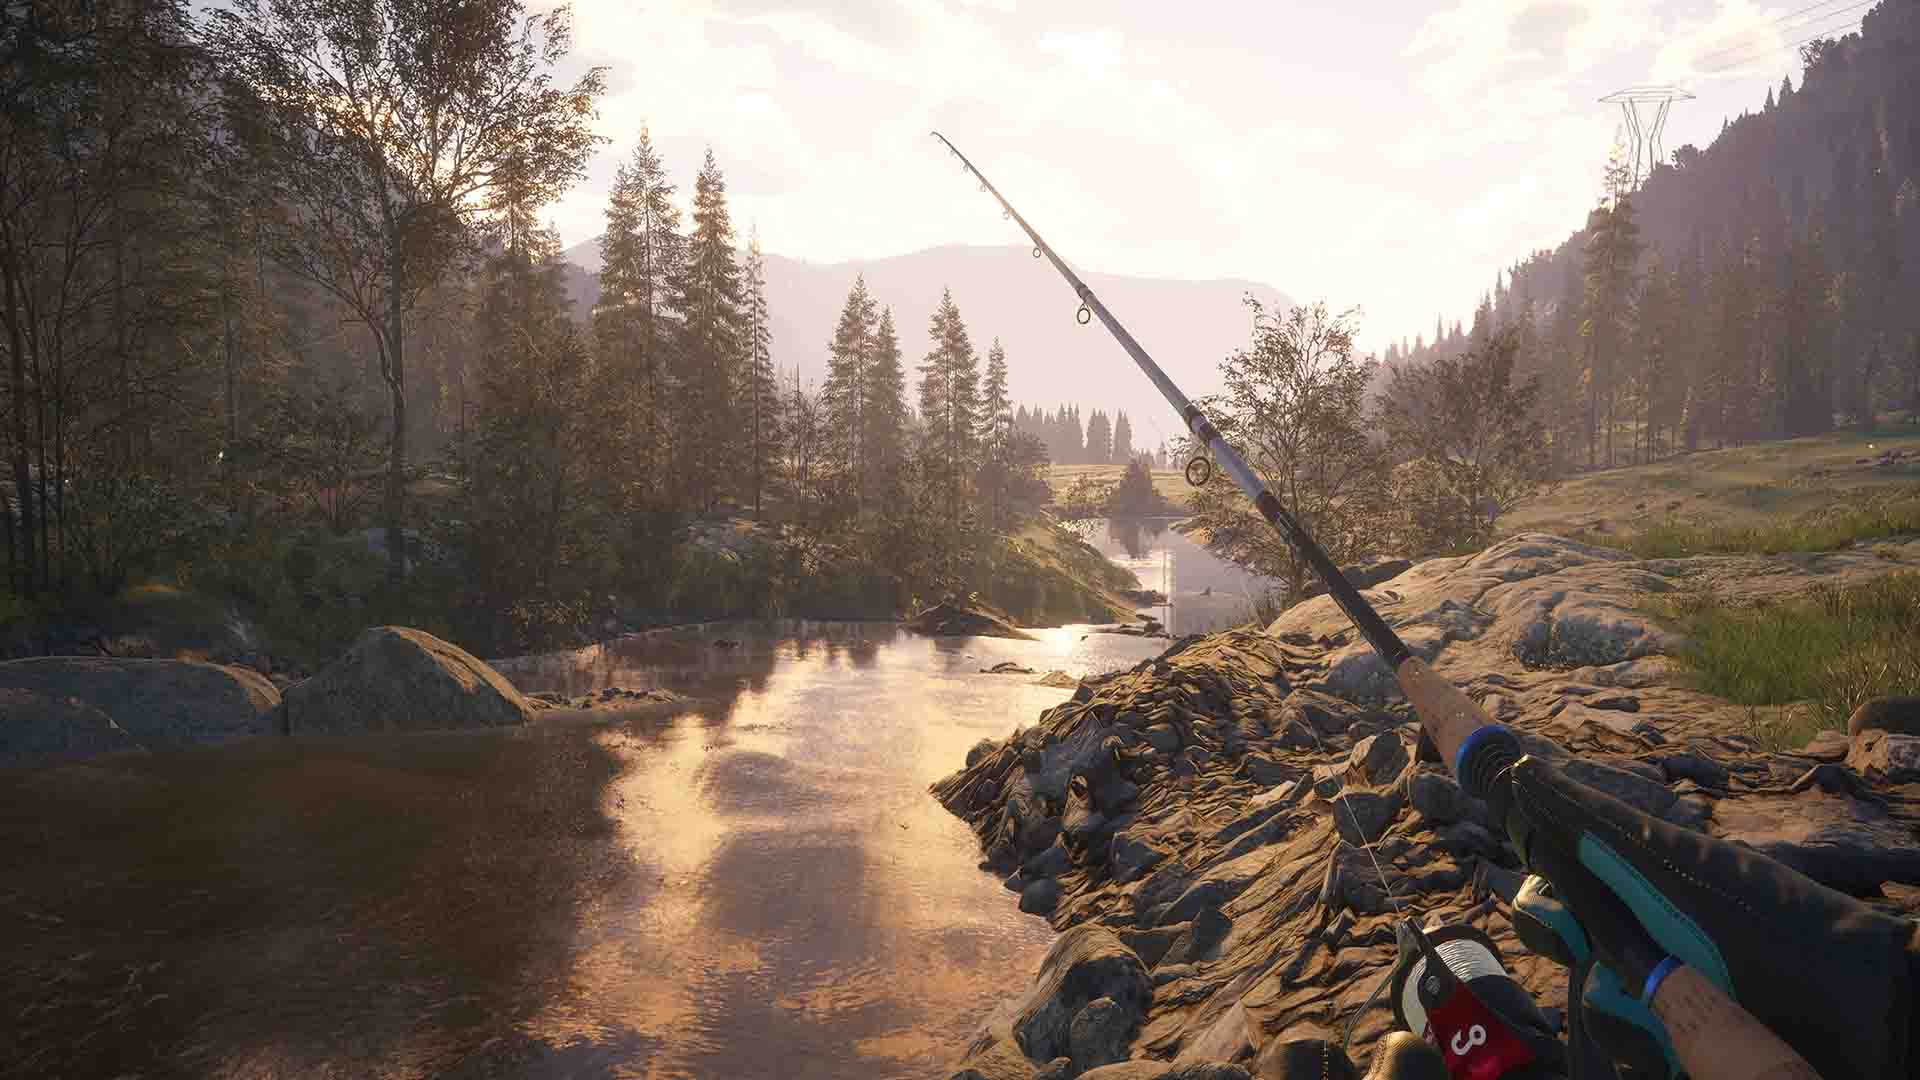 https://www.godisageek.com/wp-content/uploads/Call-of-the-Wild-The-Angler-is-launching-this-month-will-be-free-for-a-limited-time.jpg